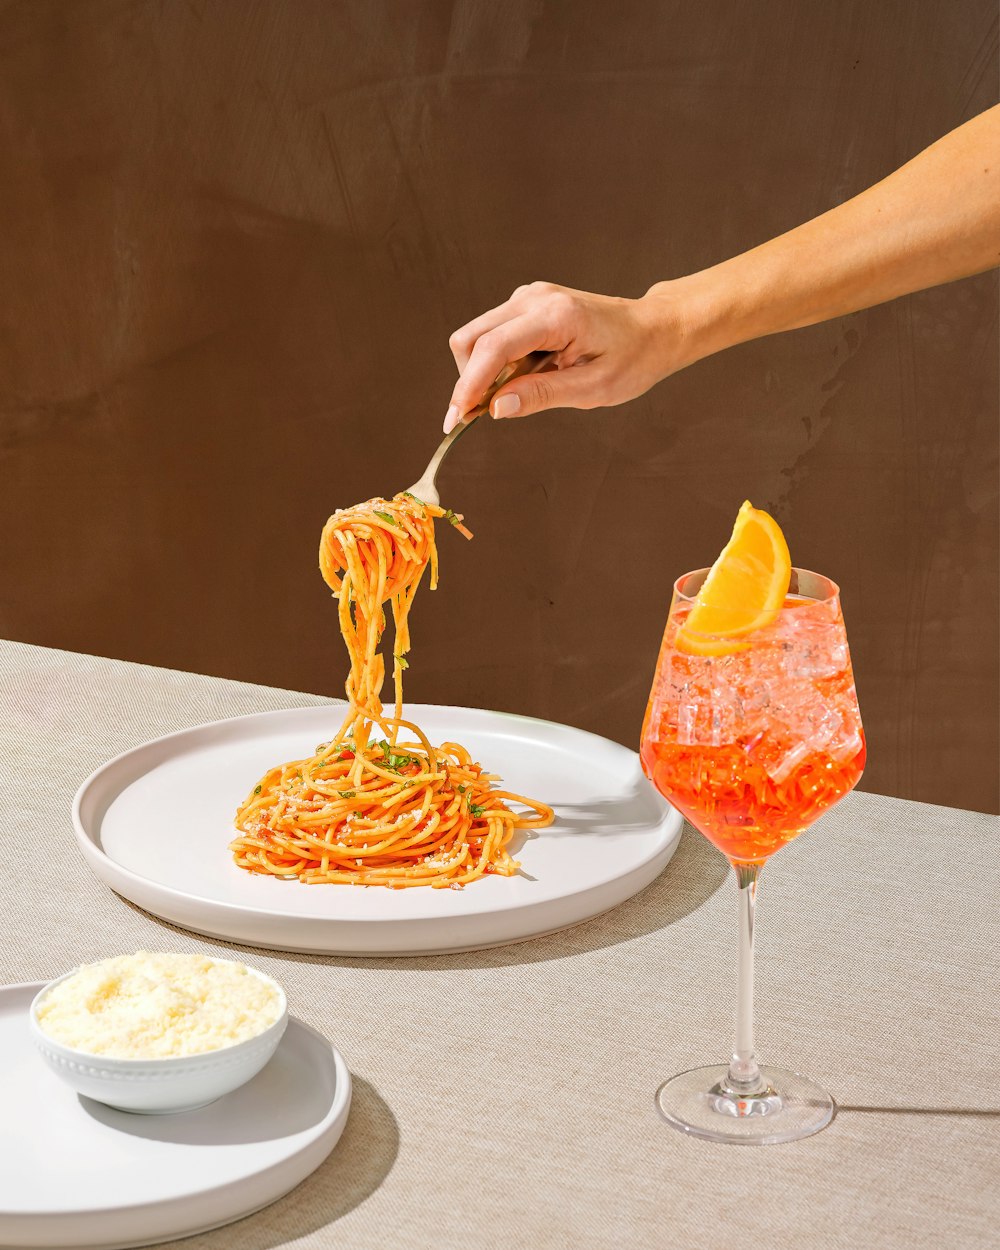 a person is eating spaghetti on a plate